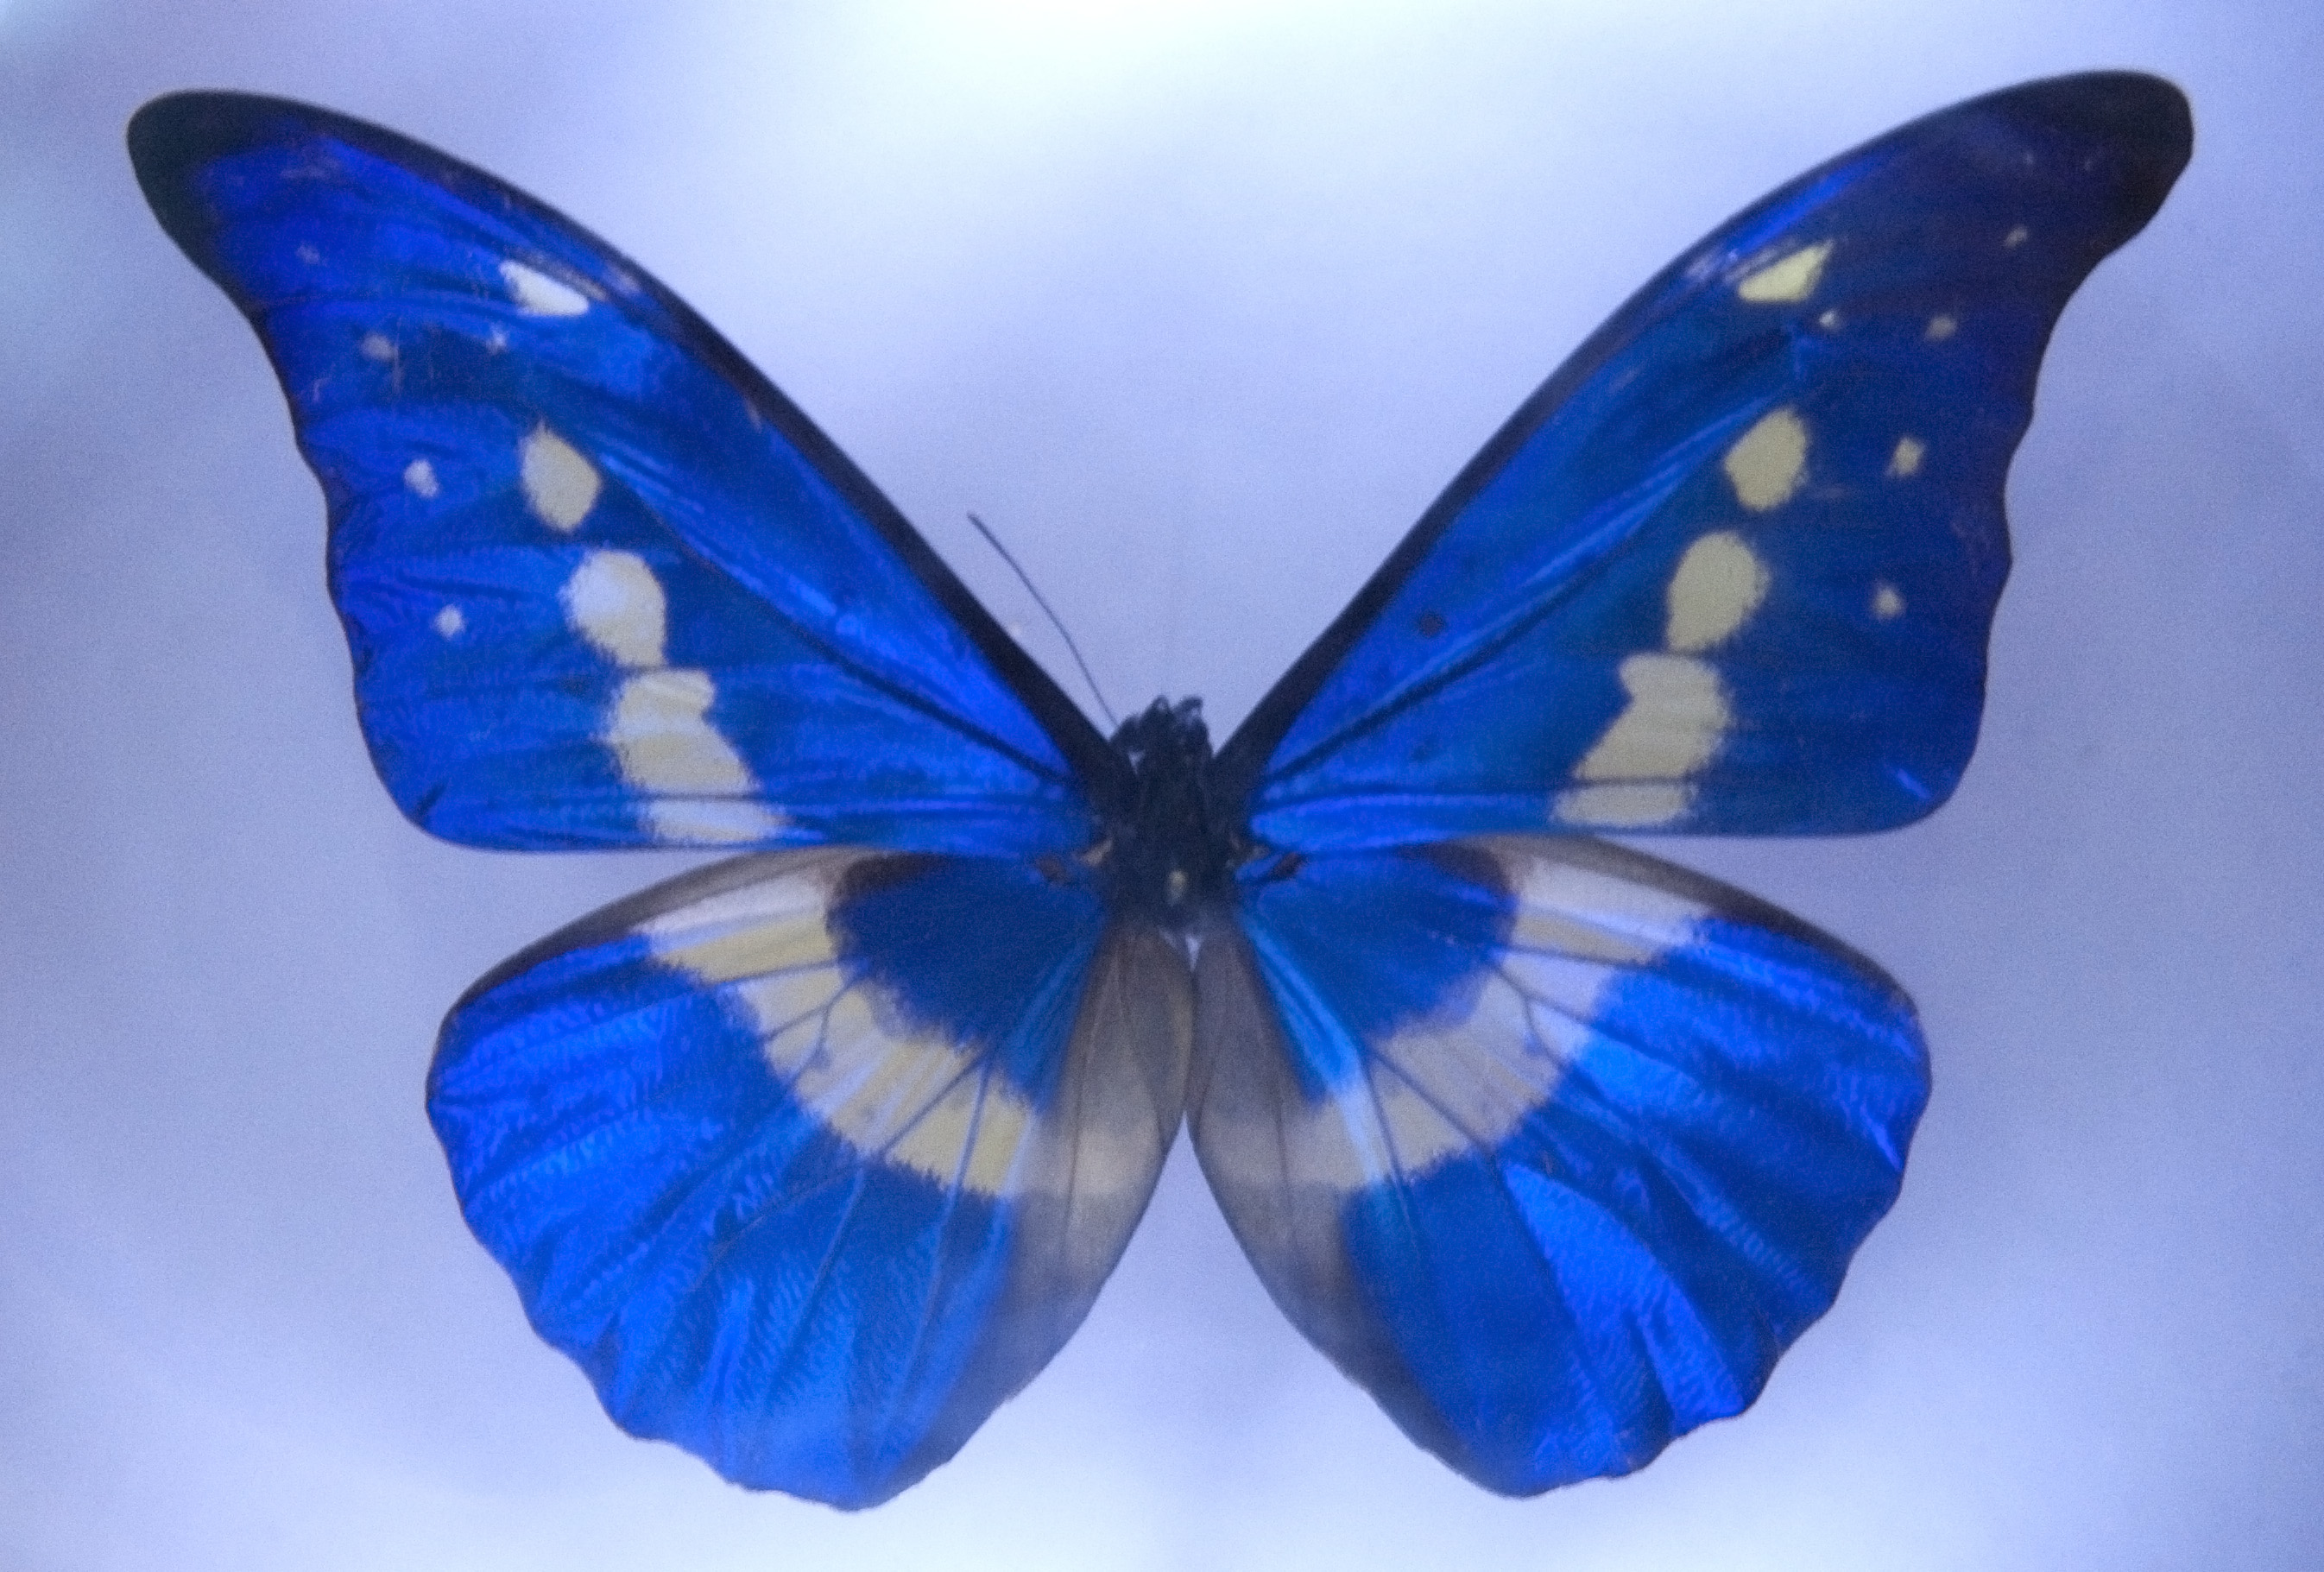 Free Stock Photo 2180-blue butterfly | freeimageslive